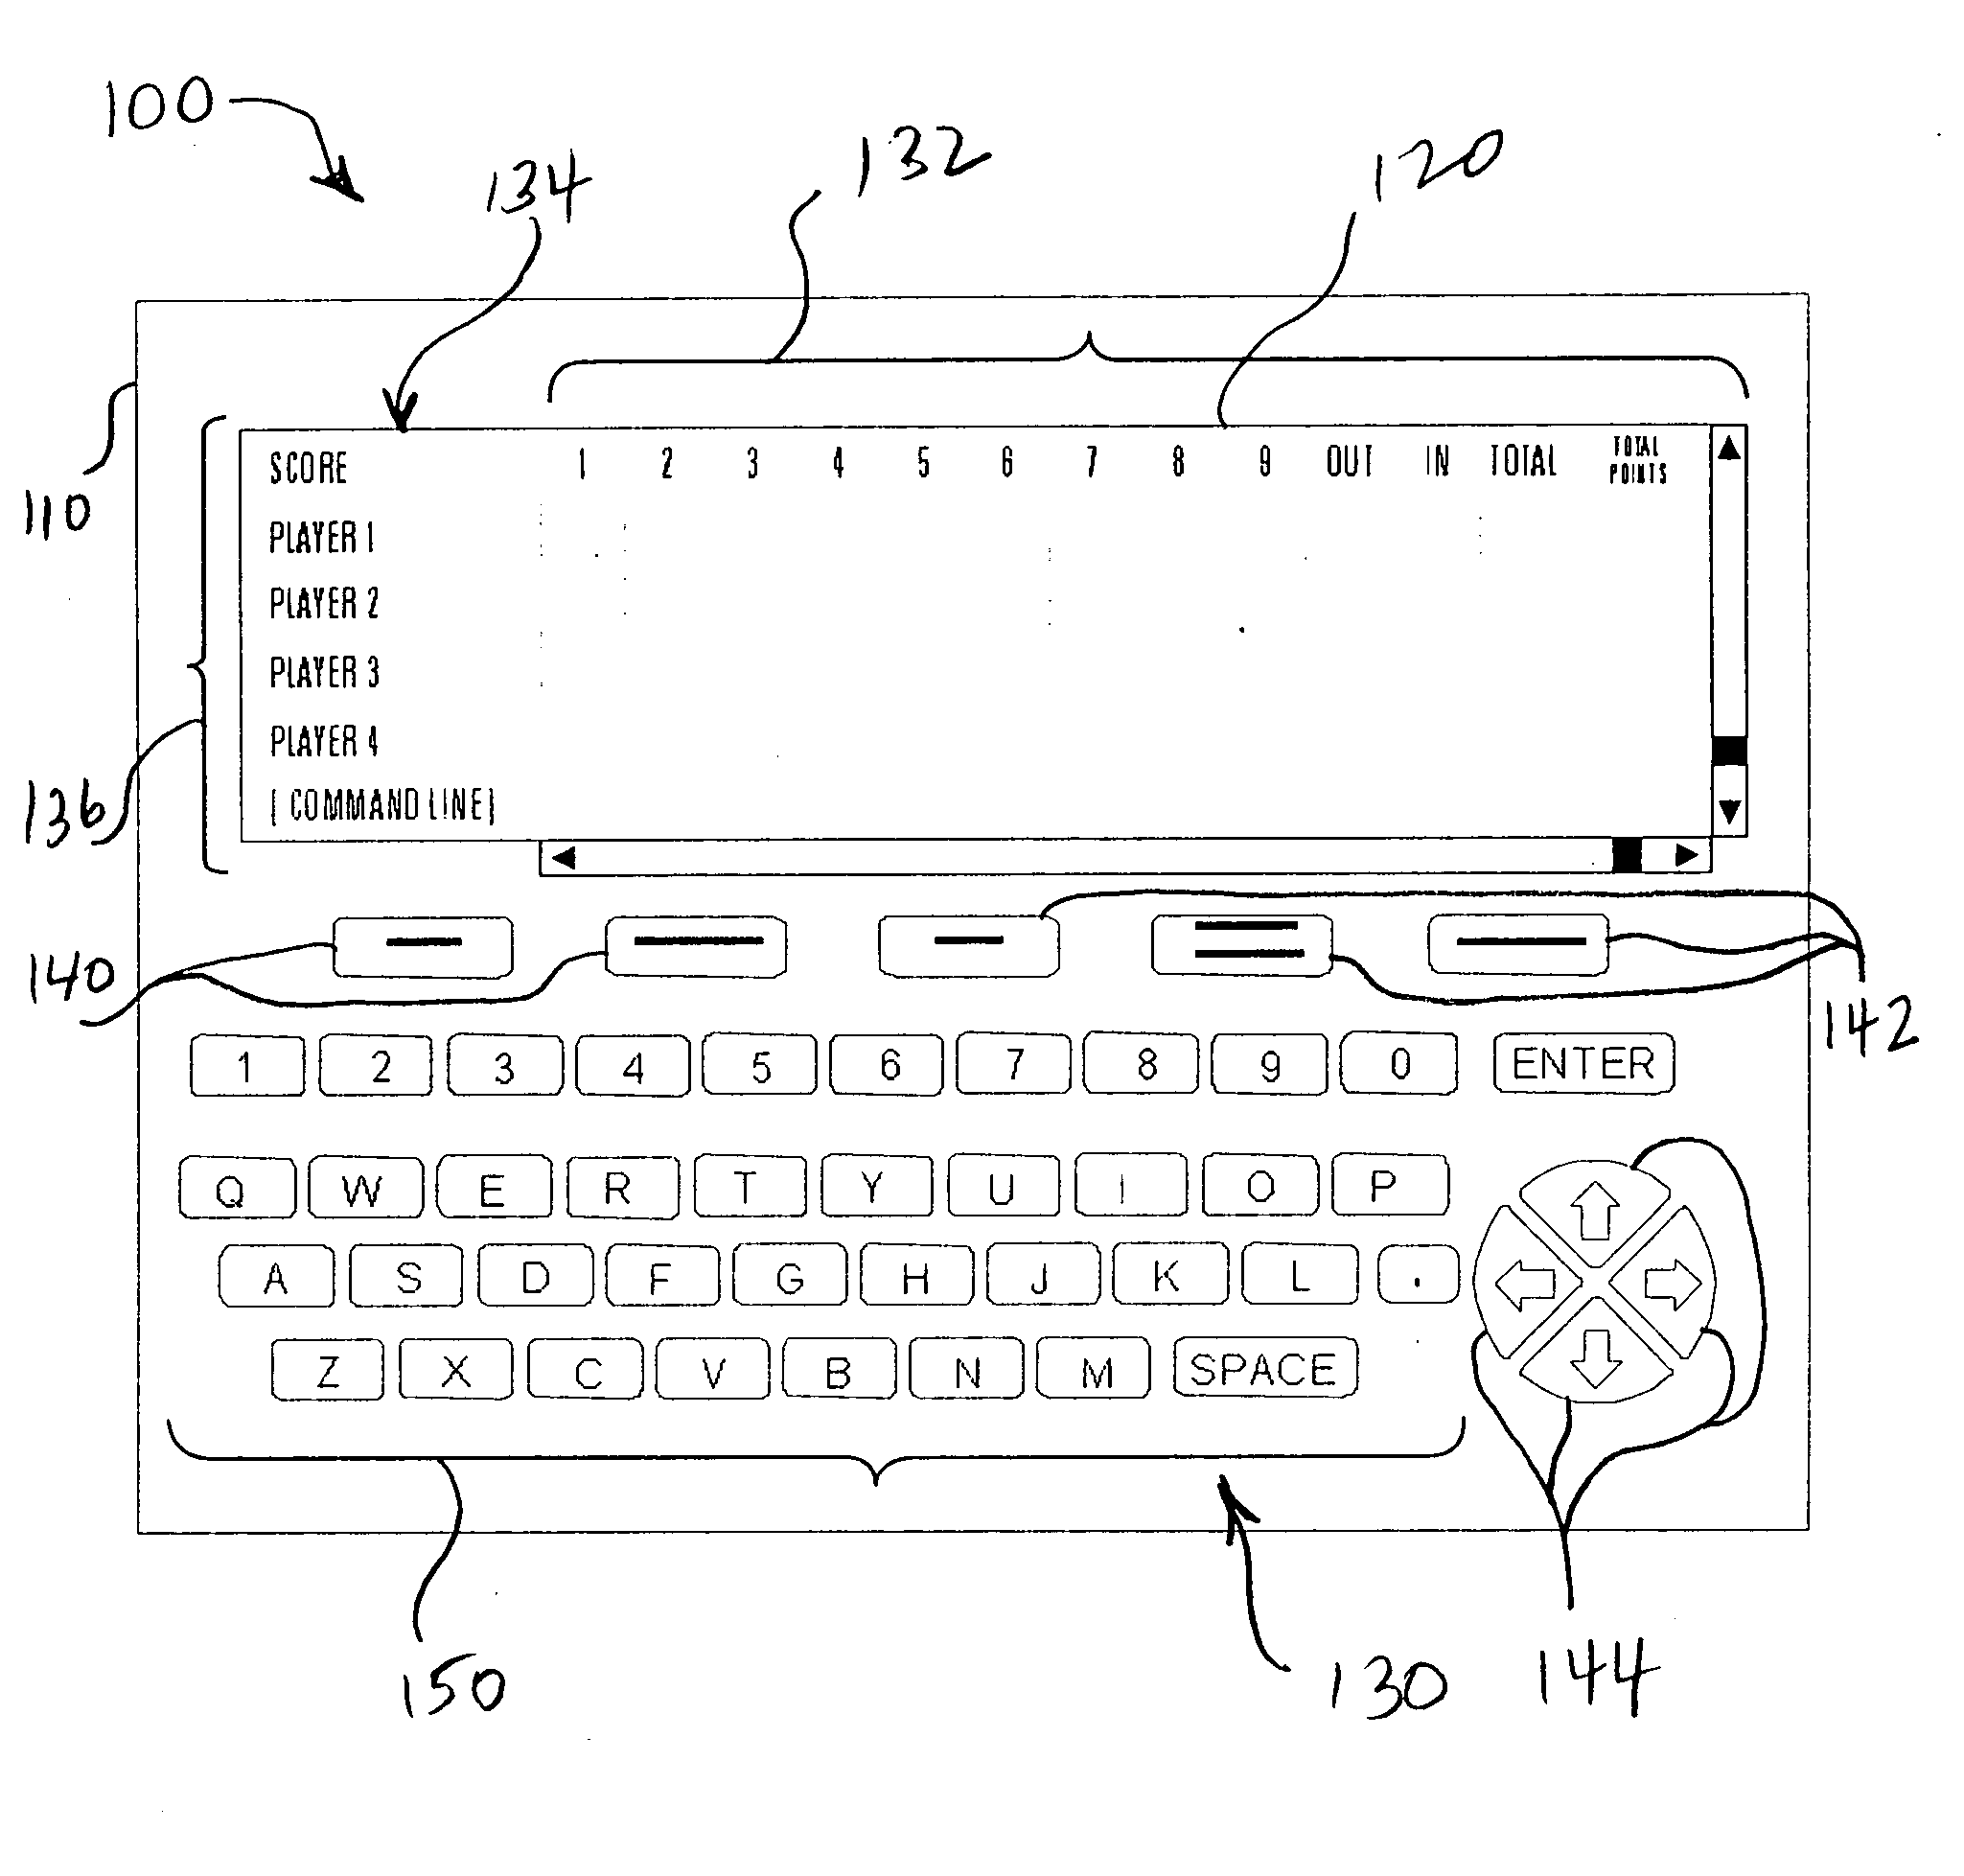 Golf score and information device and system